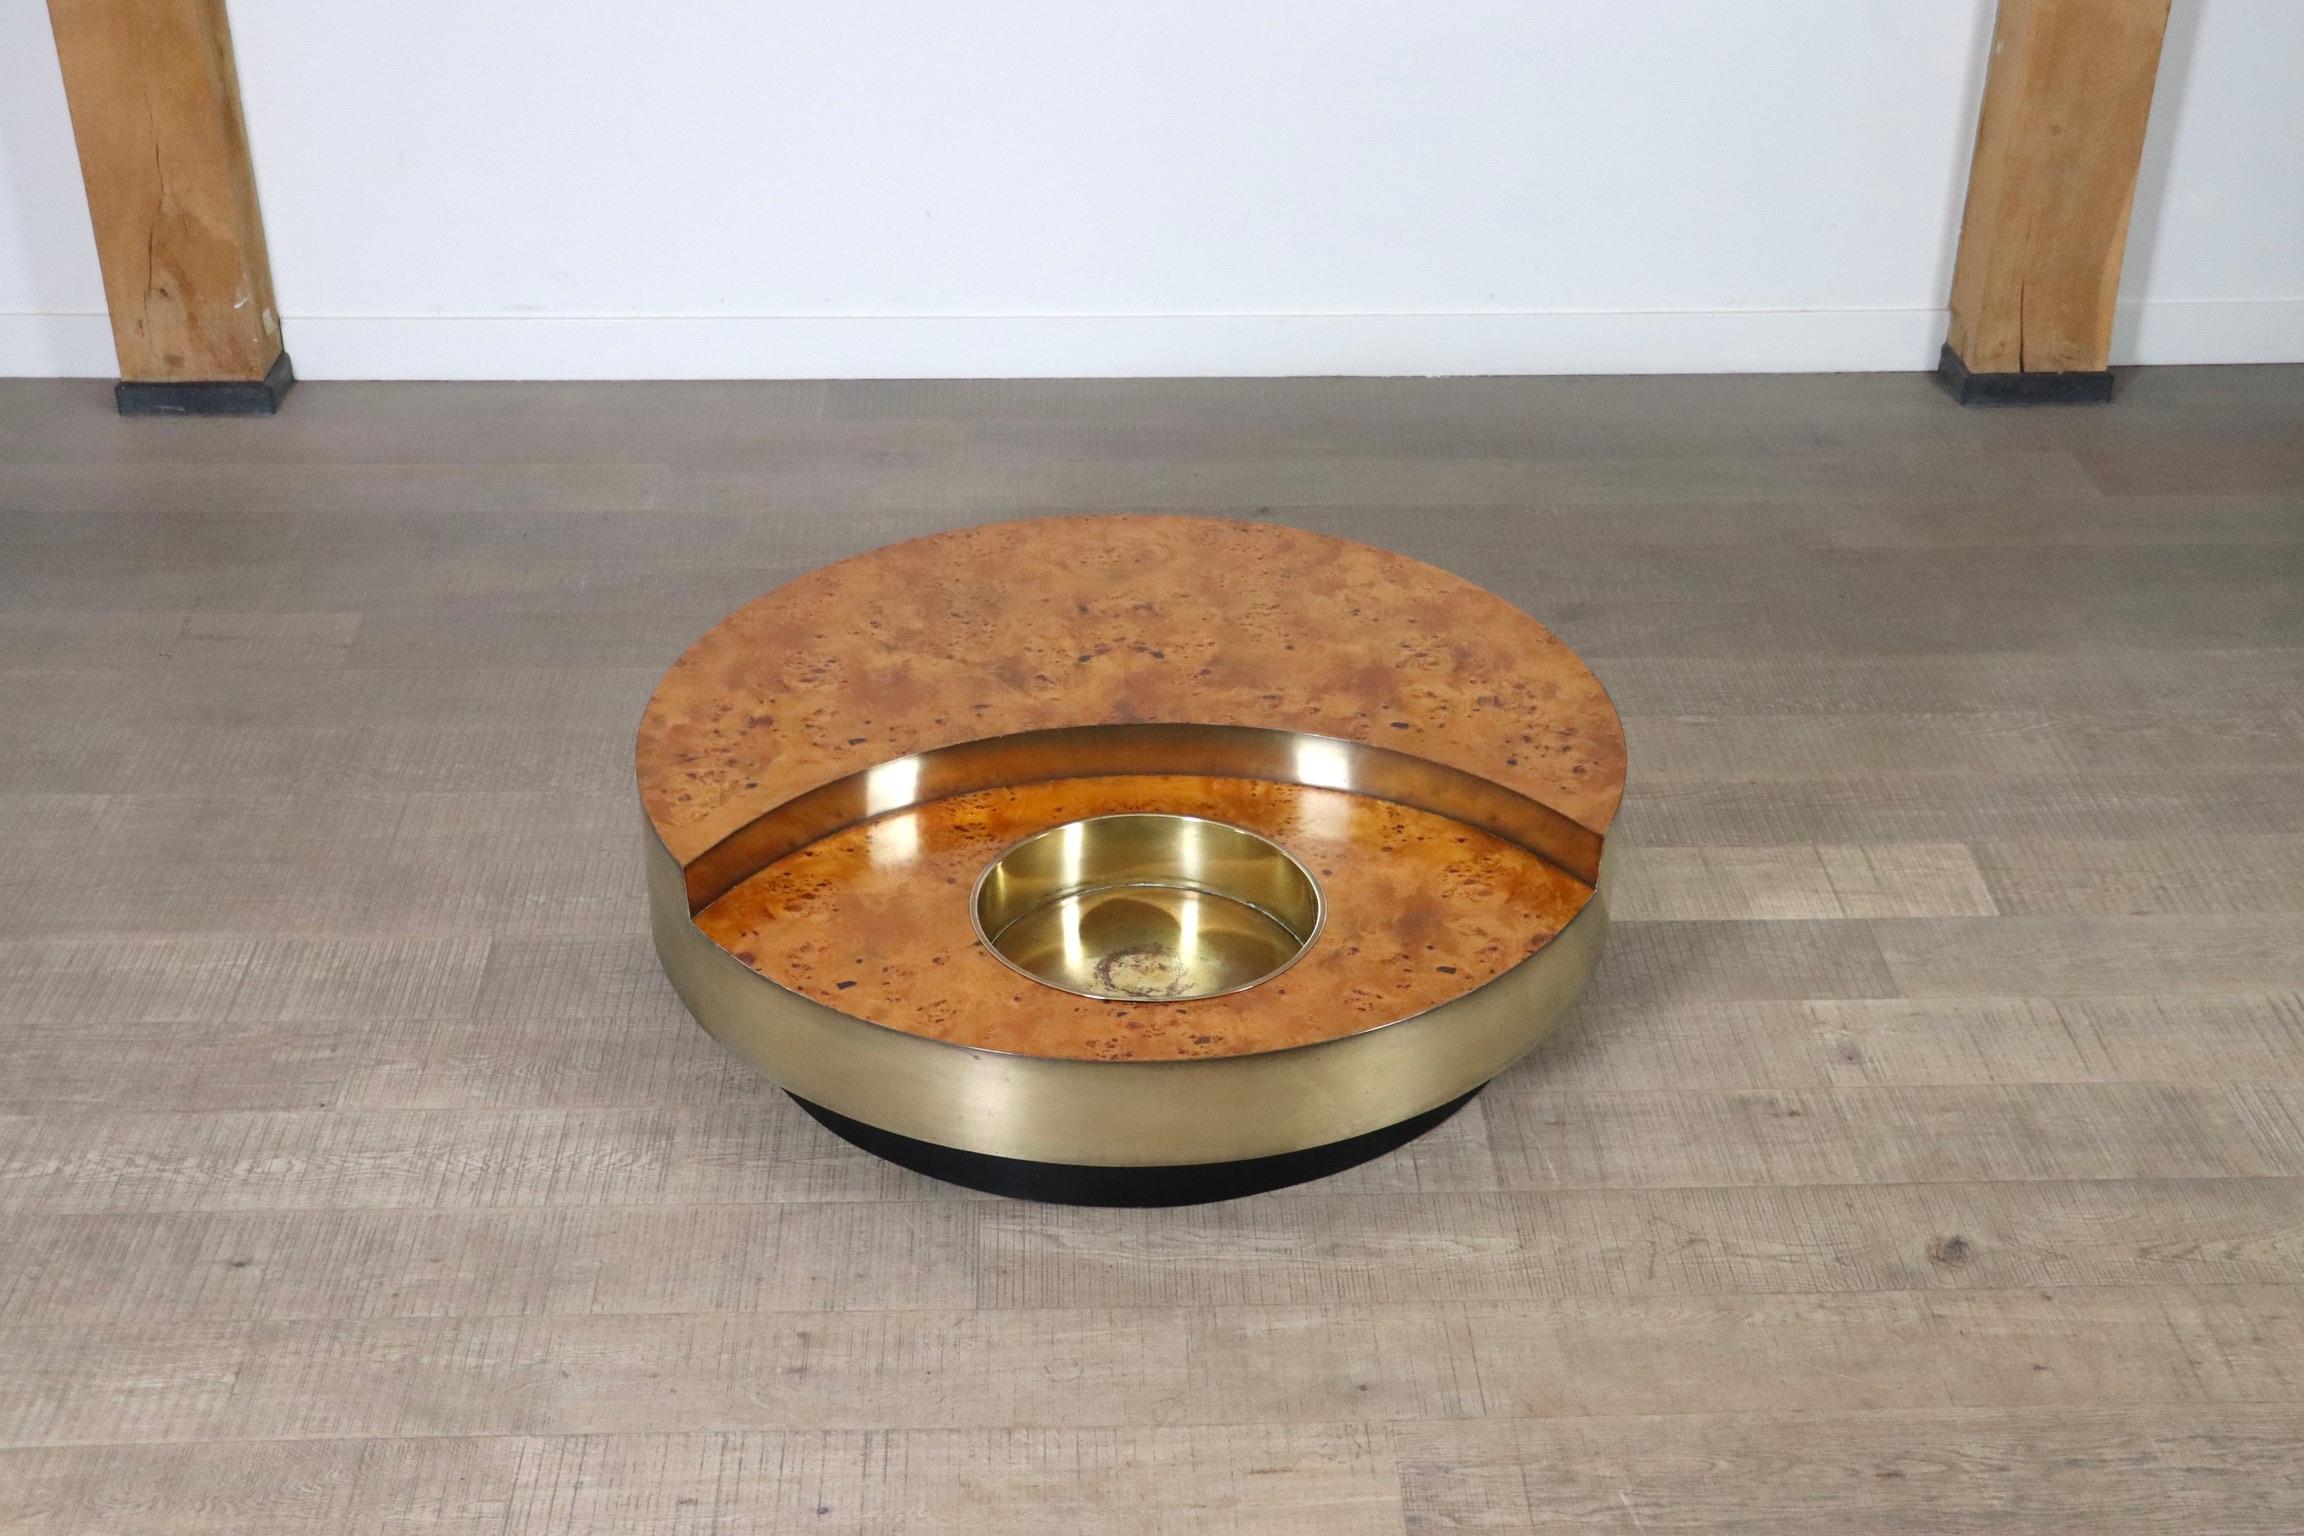 Spectacular TRG revolving coffee table in walnut Burl and brass, designed by Willy Rizzo and manufactured by Studio Willy Rizzo, Italy 1970.

This design was originally made especially in 1969 for the interior design of Gigi Cassini’s apartment in